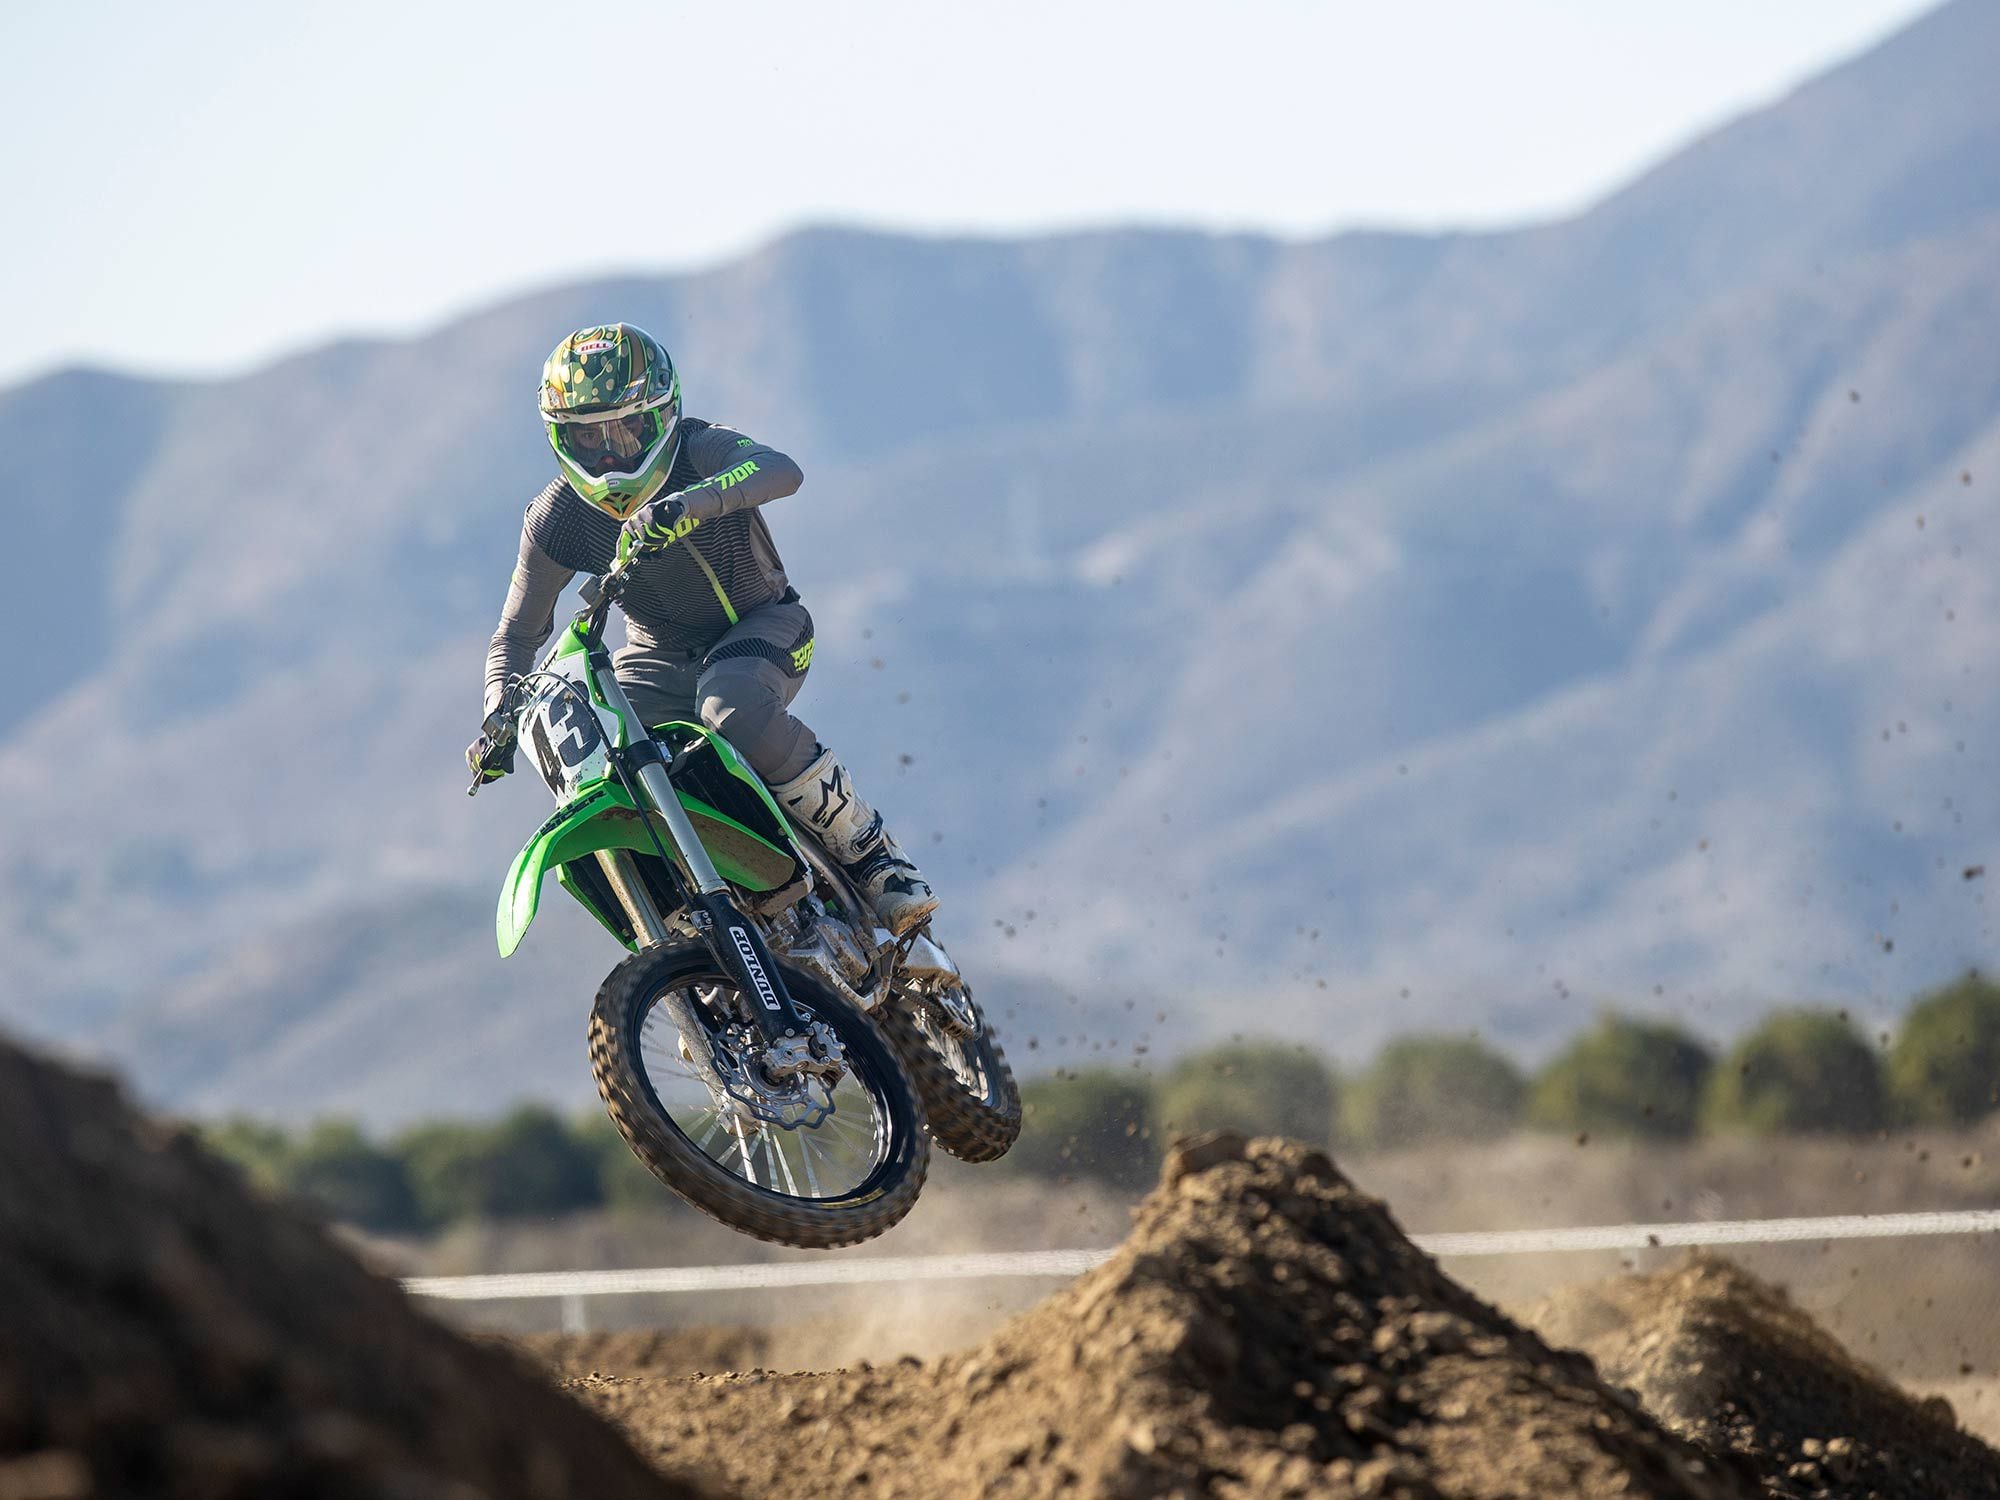 “In addition to being very plush, the KX450’s suspension is consistent from track to track.” <i>—Michael Wicker</i>